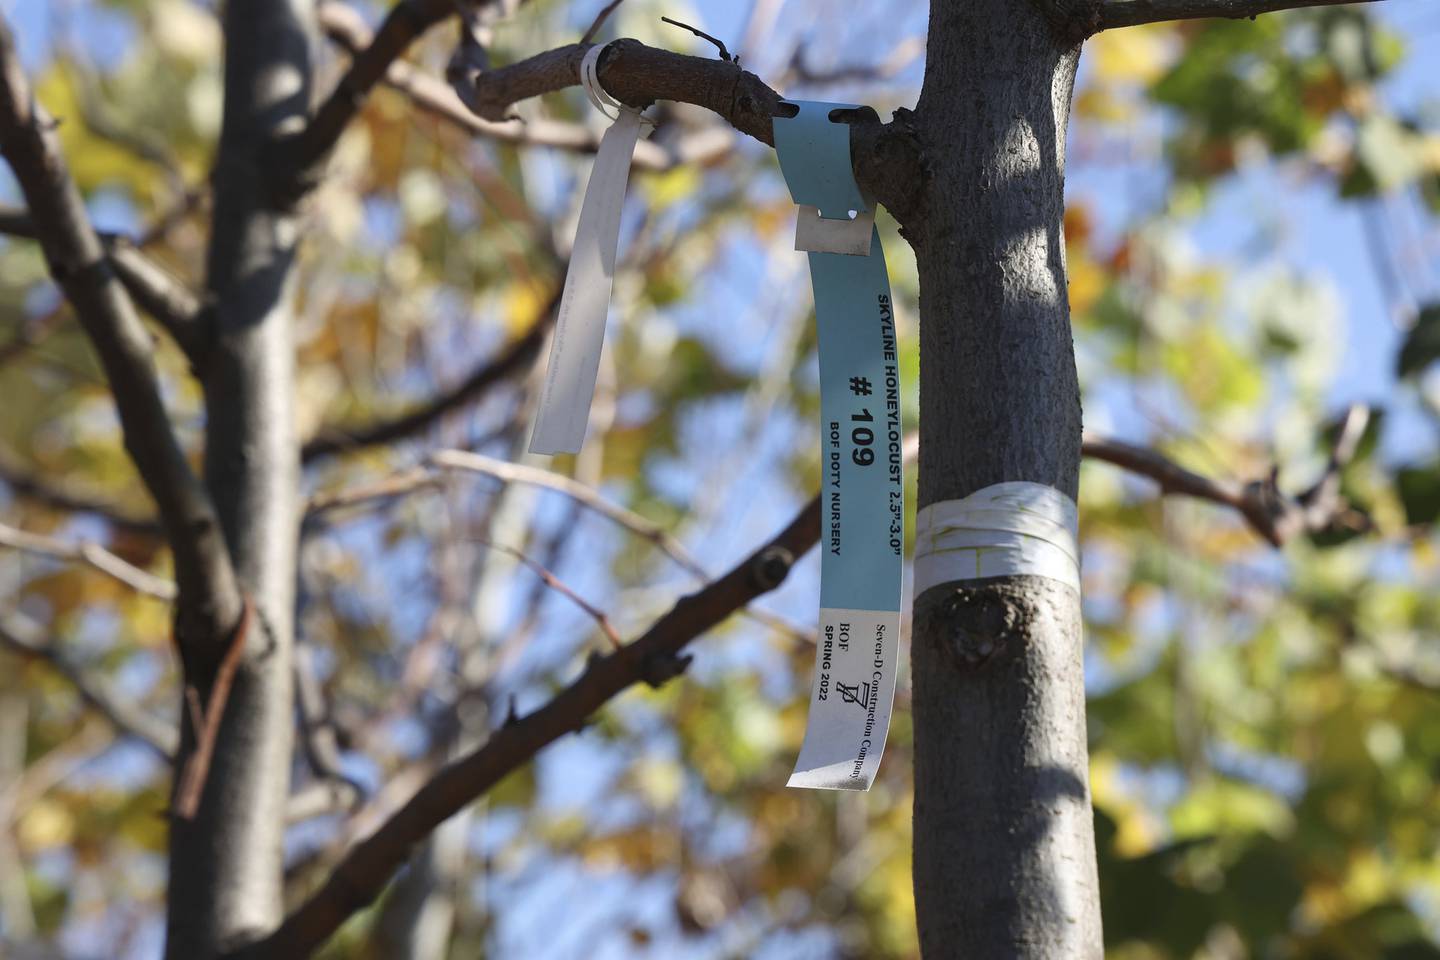 A honey locust is among a portion of the city’s unplanted trees in a lot near 46th Street and Damen Avenue.